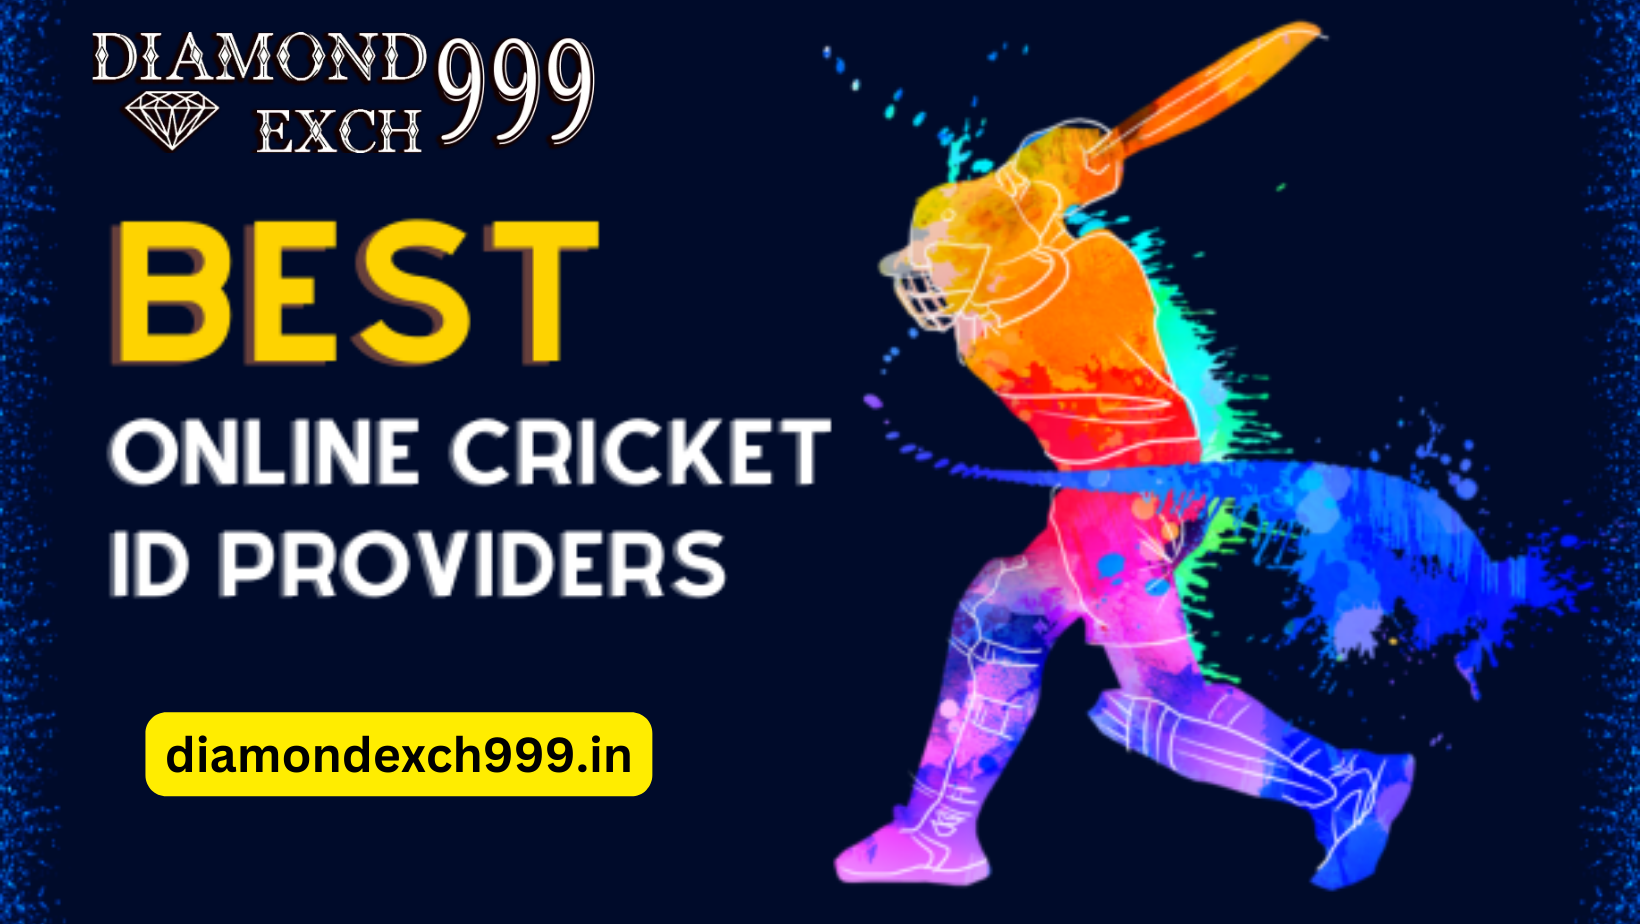 Diamondexch : India’s Most Trusted Online Cricket ID Provider